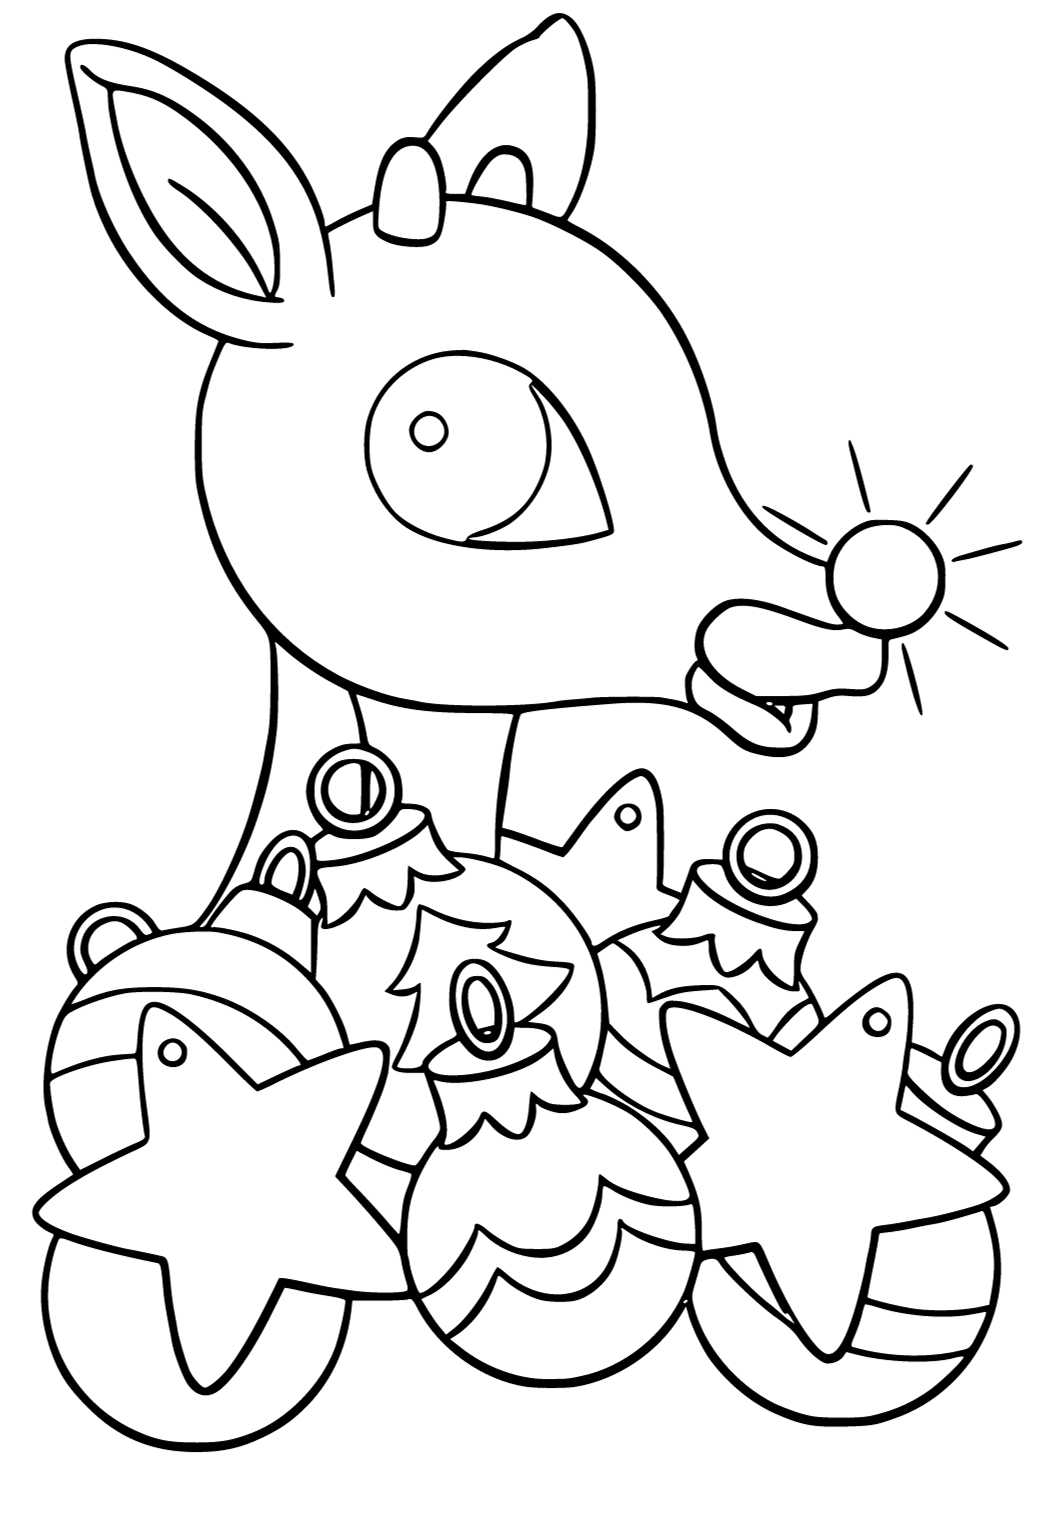 Free printable rudolph the red nosed reindeer decorations coloring page for adults and kids